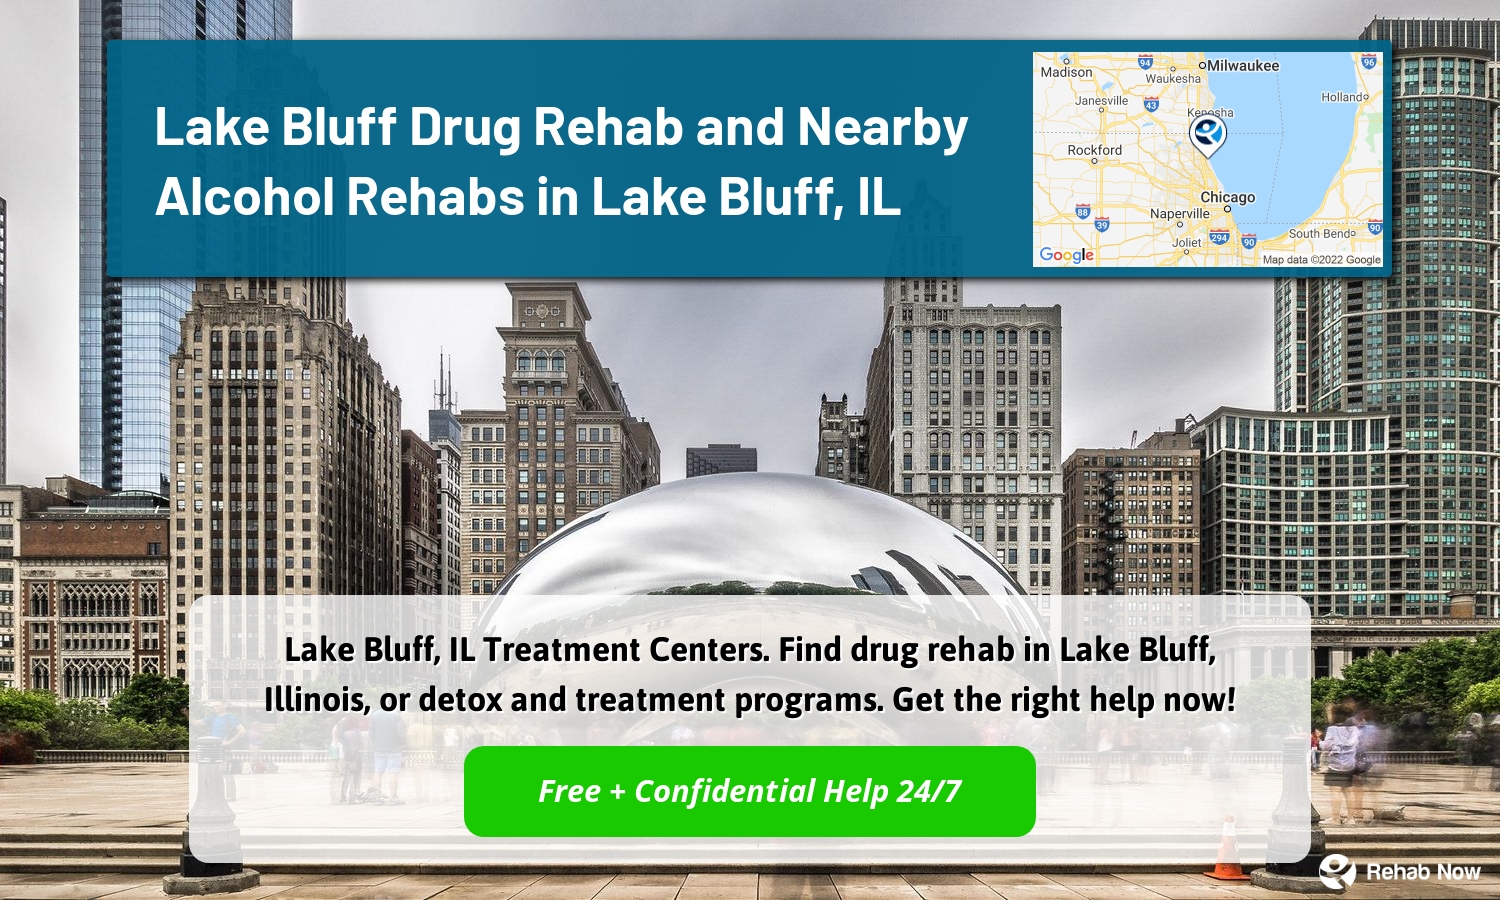 Lake Bluff, IL Treatment Centers. Find drug rehab in Lake Bluff, Illinois, or detox and treatment programs. Get the right help now!